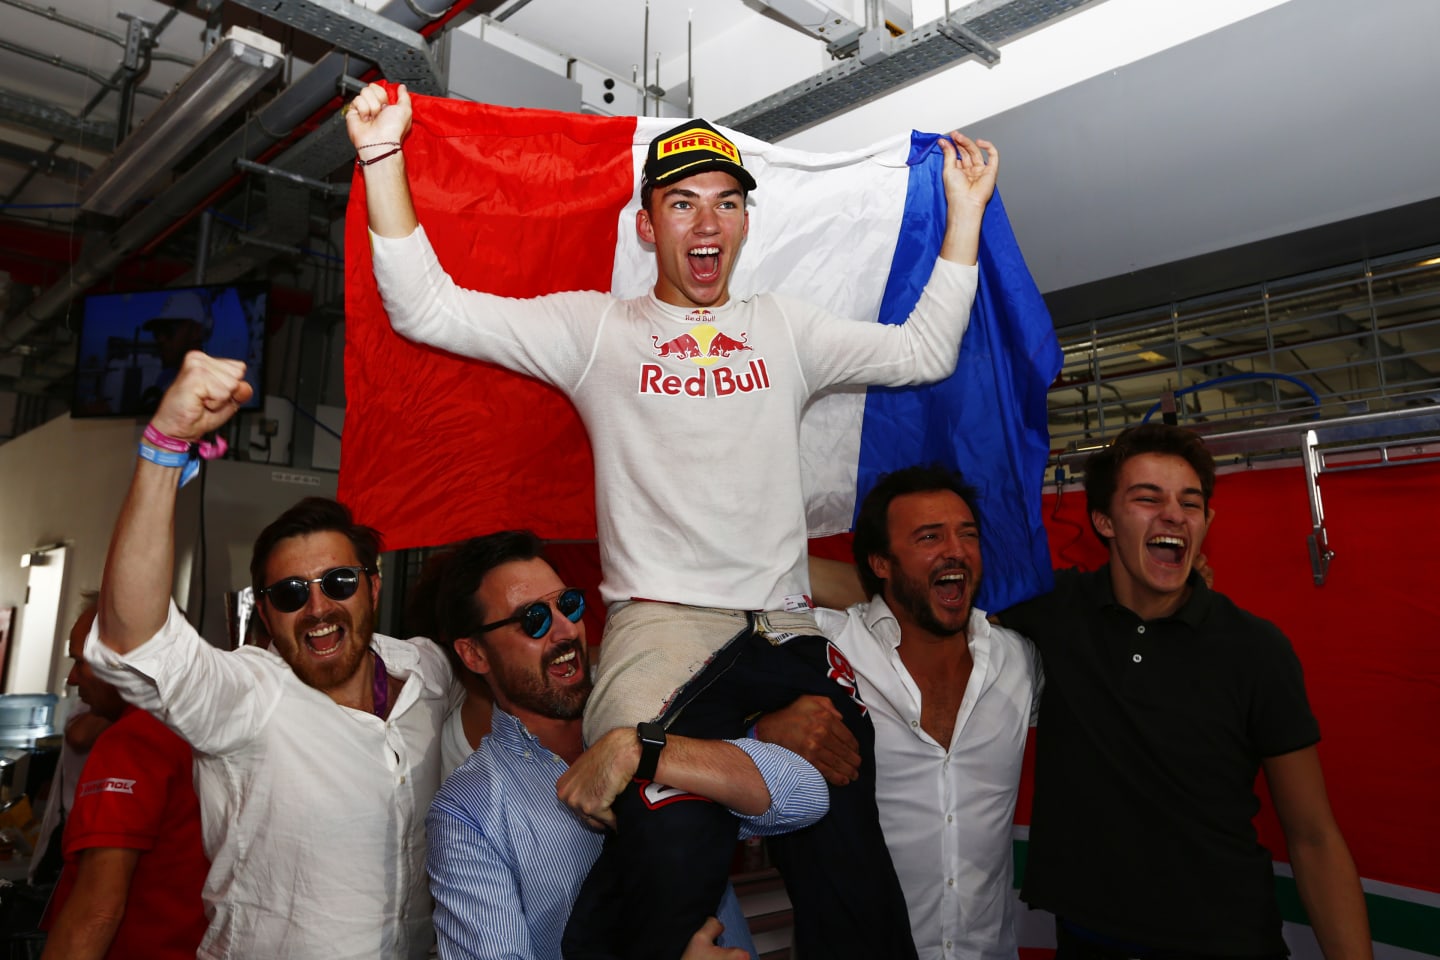 Entering GP2 at the tail-end of the 2014 season, Pierre Gasly stepped up to a full year in 2015 with DAMS but only managed to finish eighth. Knowing he needed to up his game to keep his F1 dream alive, Gasly regrouped to take the 2016 GP2 title. A full season in Japan’s Super Formula series followed, before Gasly replaced Daniil Kvyat at Toro Rosso for five of the last six races of the 2017 season, moving into a full-time race seat for 2018. For 2019, he’ll join Max Verstappen at Red Bull.